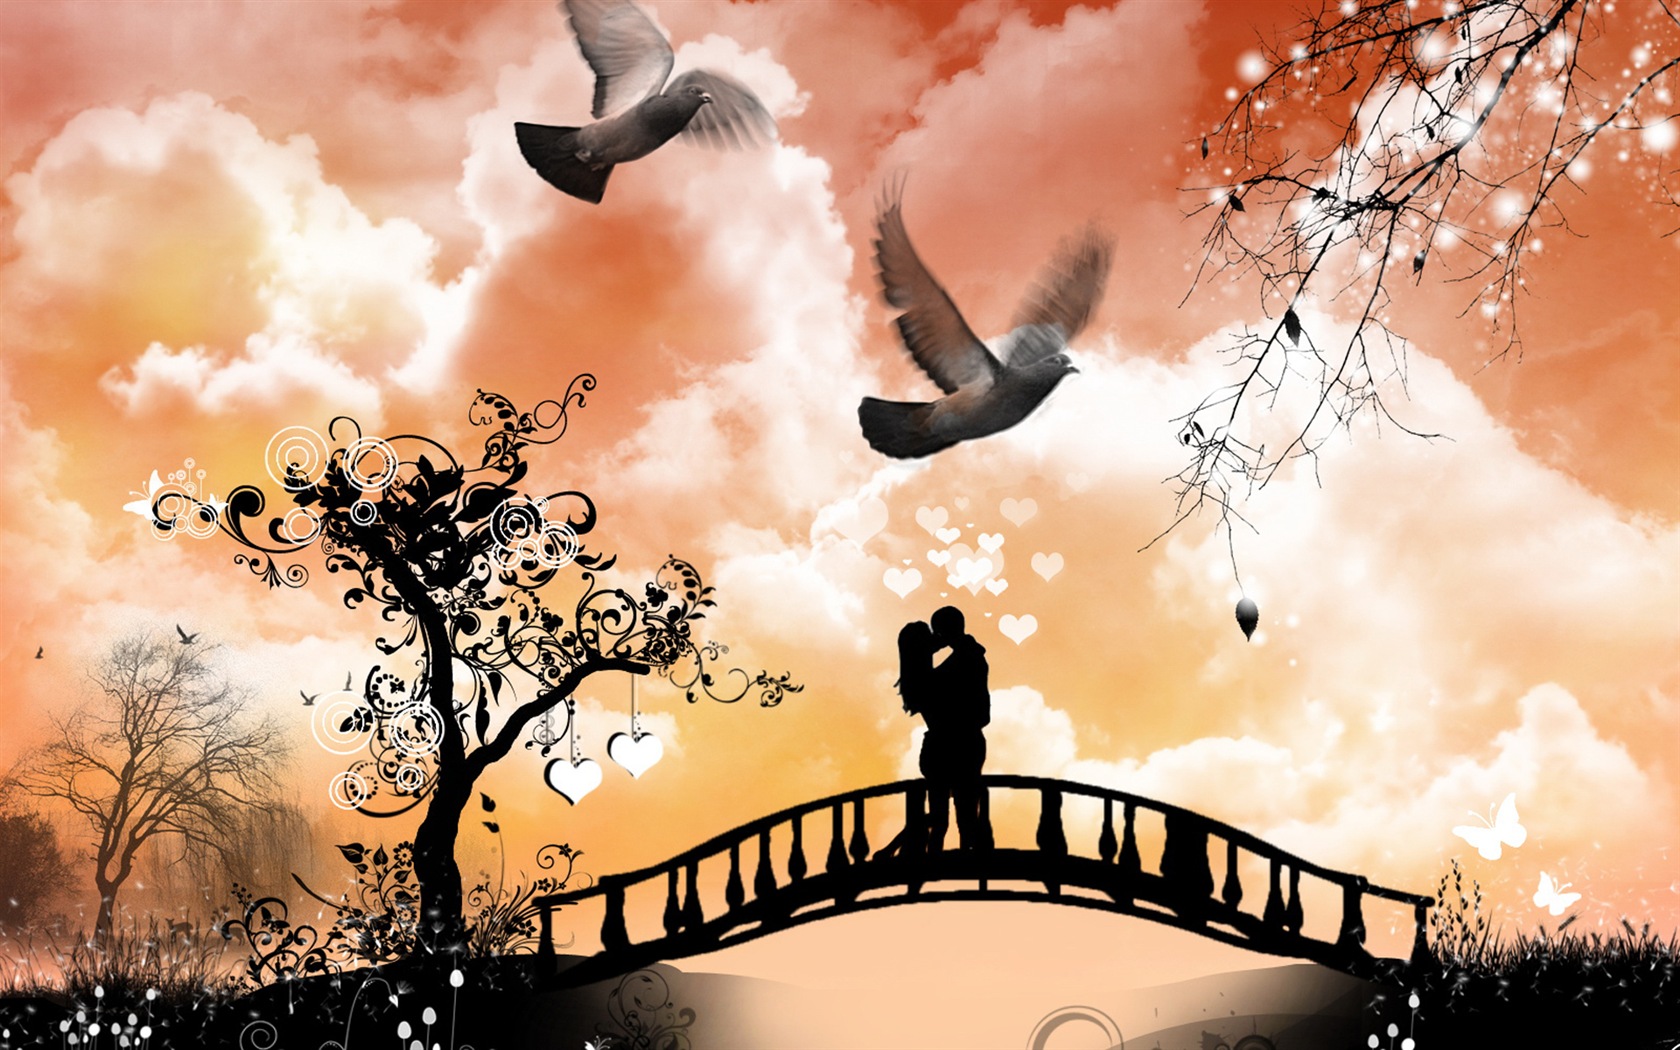 Warm and romantic Valentine's Day HD wallpapers #20 - 1680x1050